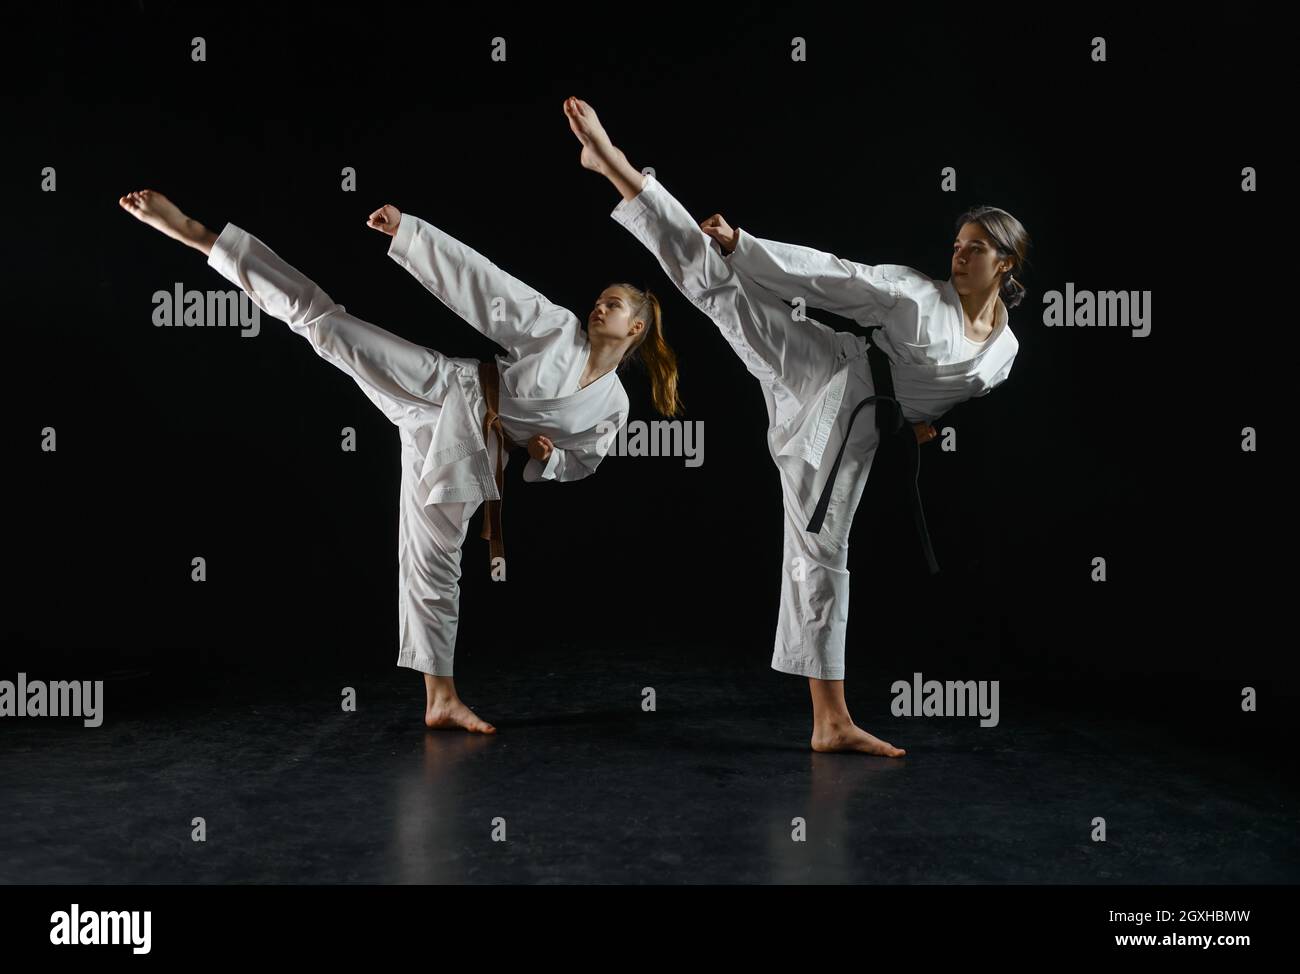 Female karatekas in white kimono, combat stance in action, dark background.  Karate fighters on workout, martial arts, women fighting competition Stock  Photo - Alamy